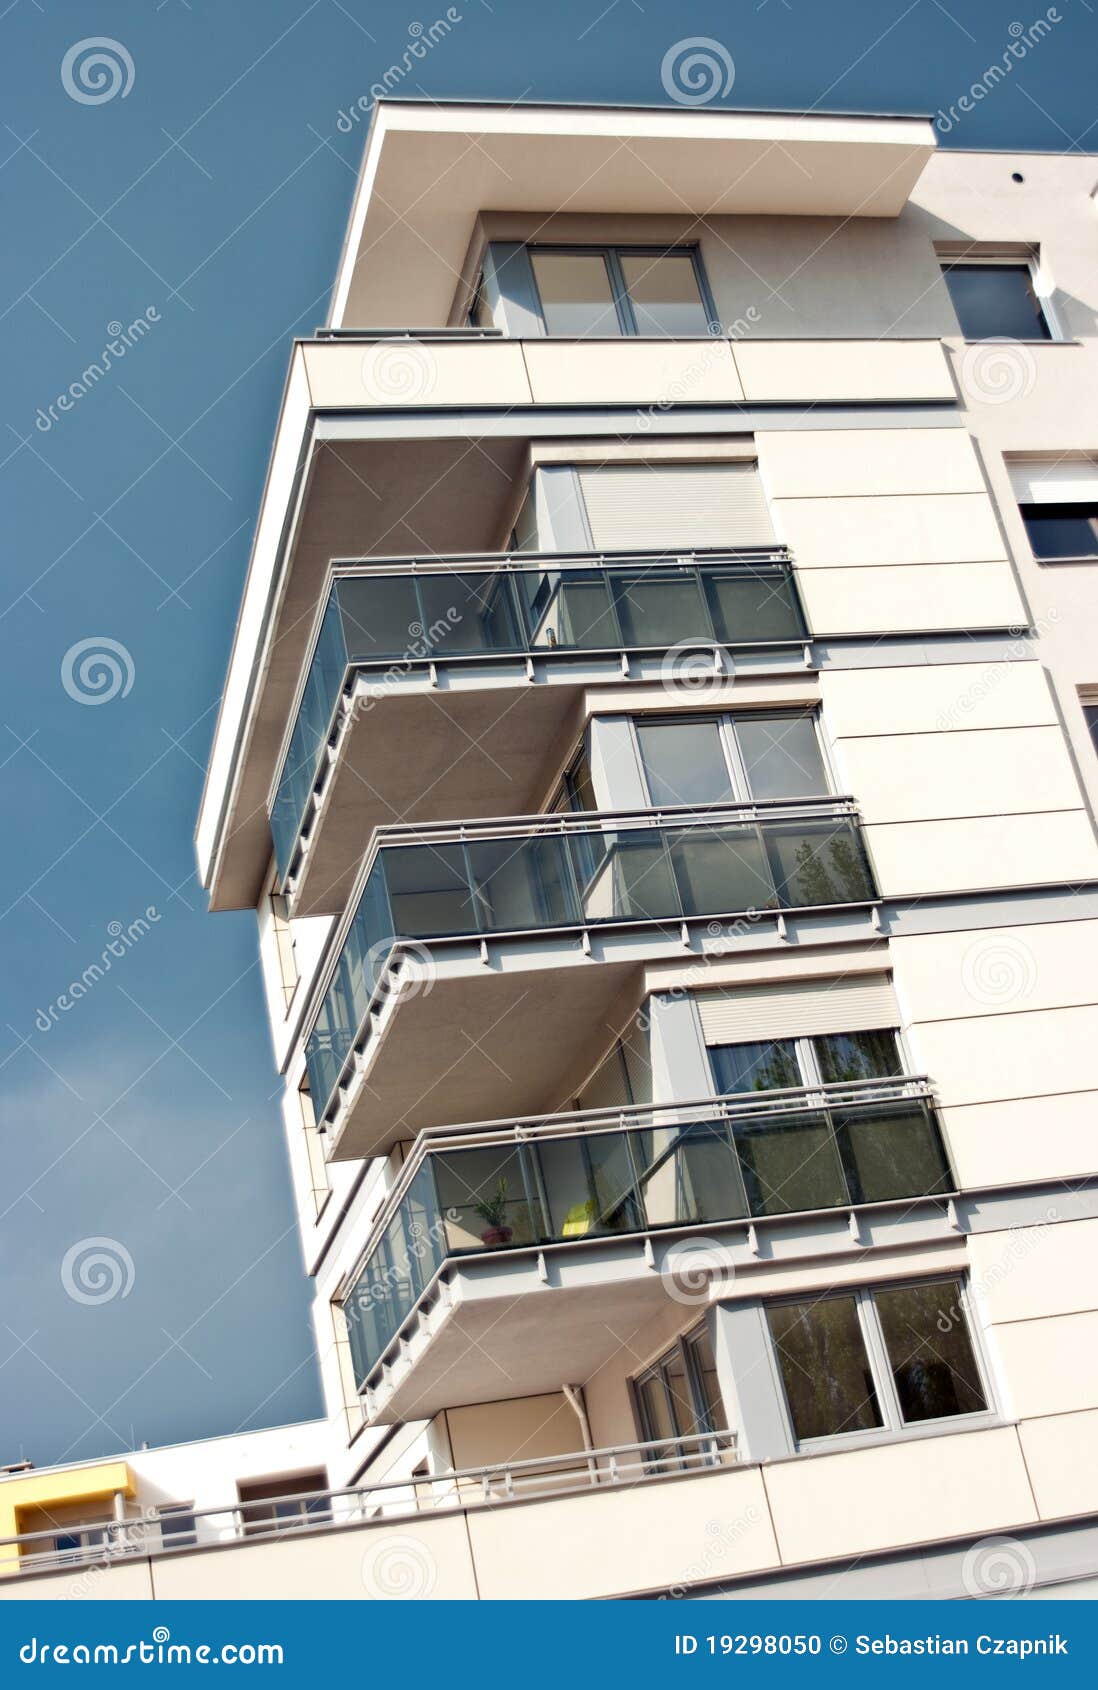 apartments with balconies